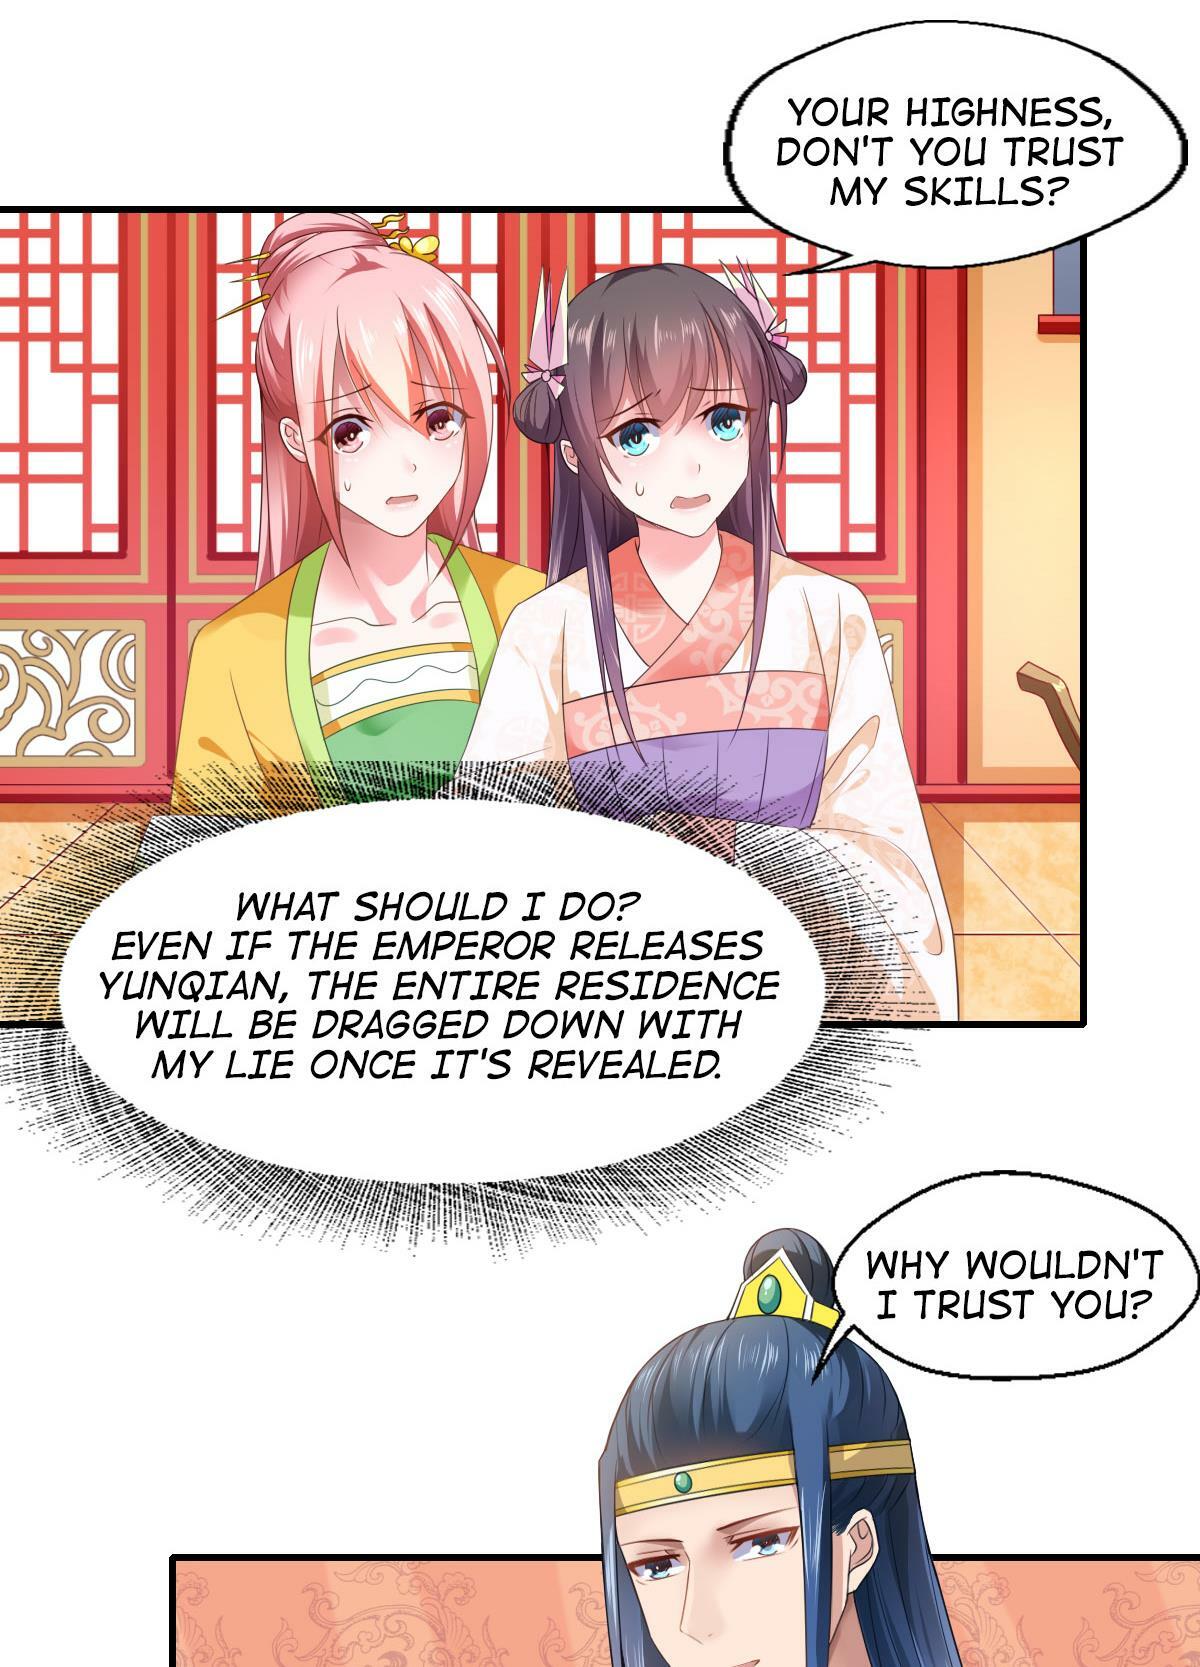 Affairs Of The Enchanting Doctor Chapter 72: Your Attempts To Save Him Might Cause His Death page 21 - Mangakakalots.com